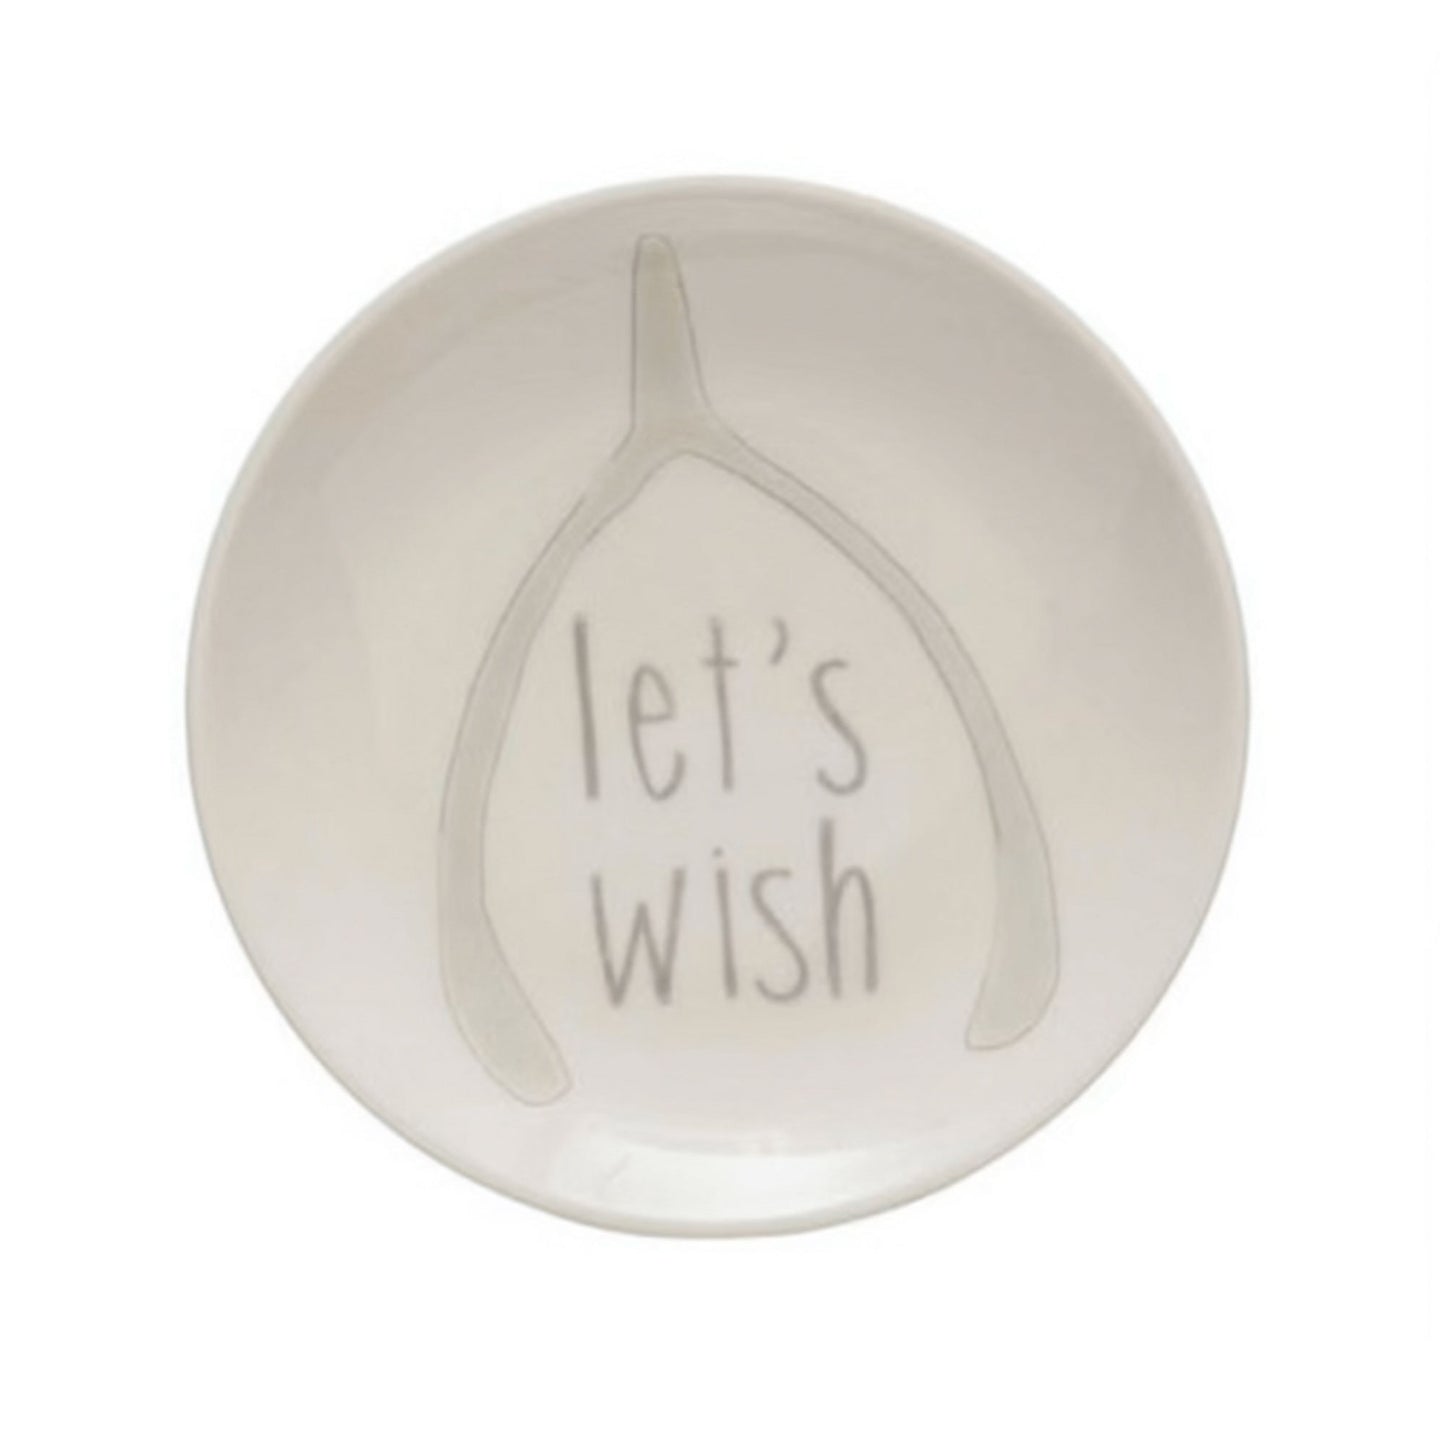 Creative Co-op Stoneware Plate with Thanksgiving Phrases - 5" - Let's Wish